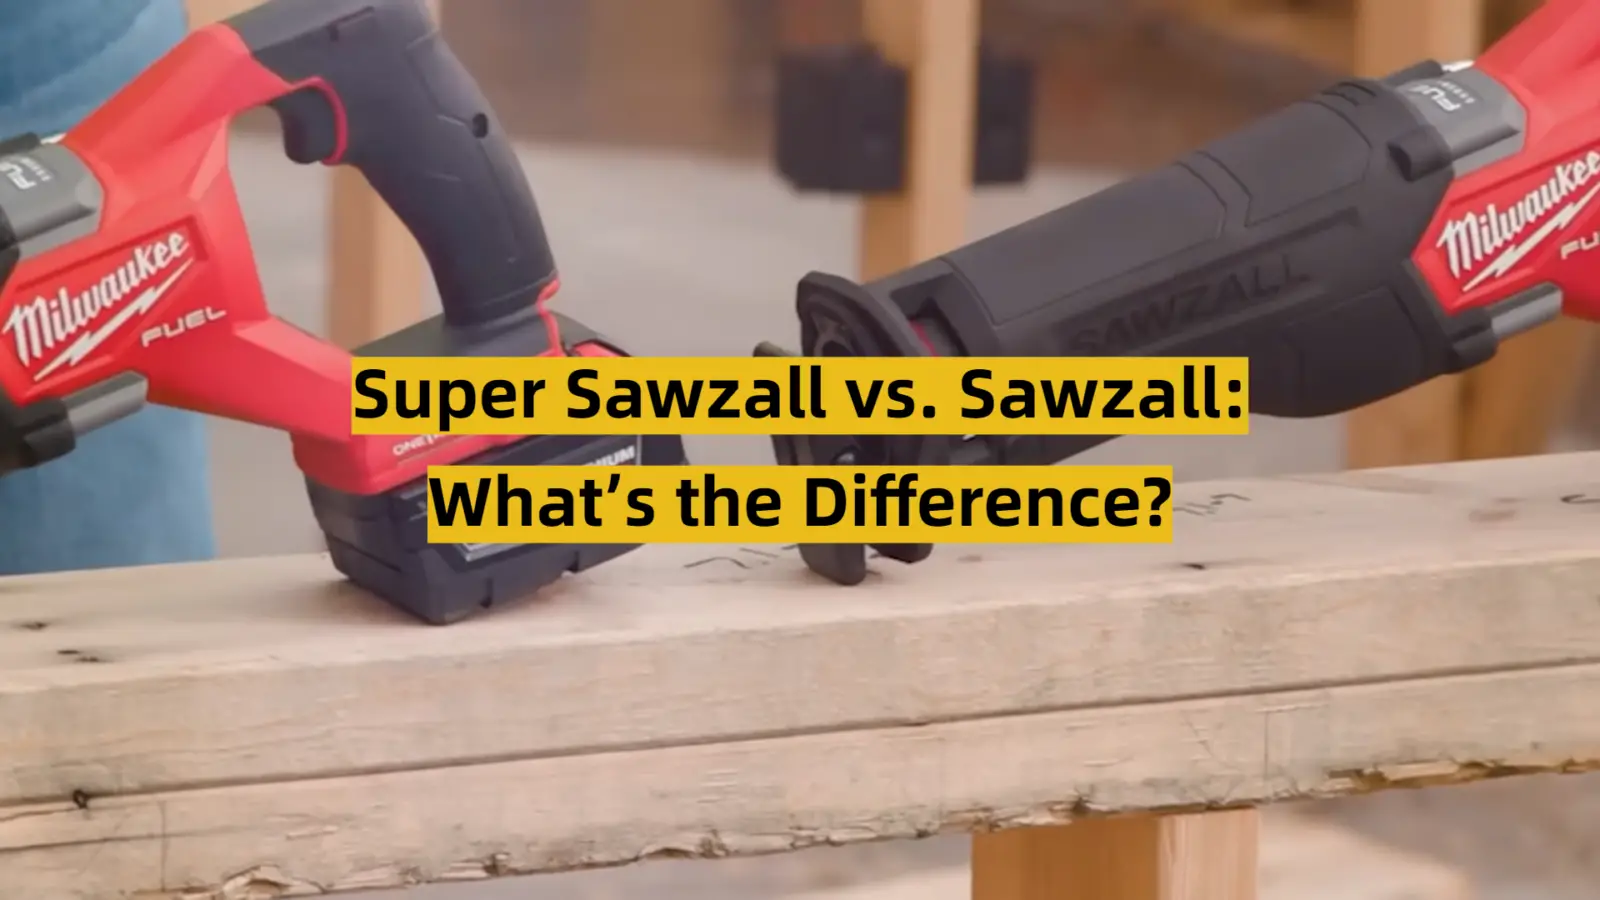 Super Sawzall vs. Sawzall: What’s the Difference?